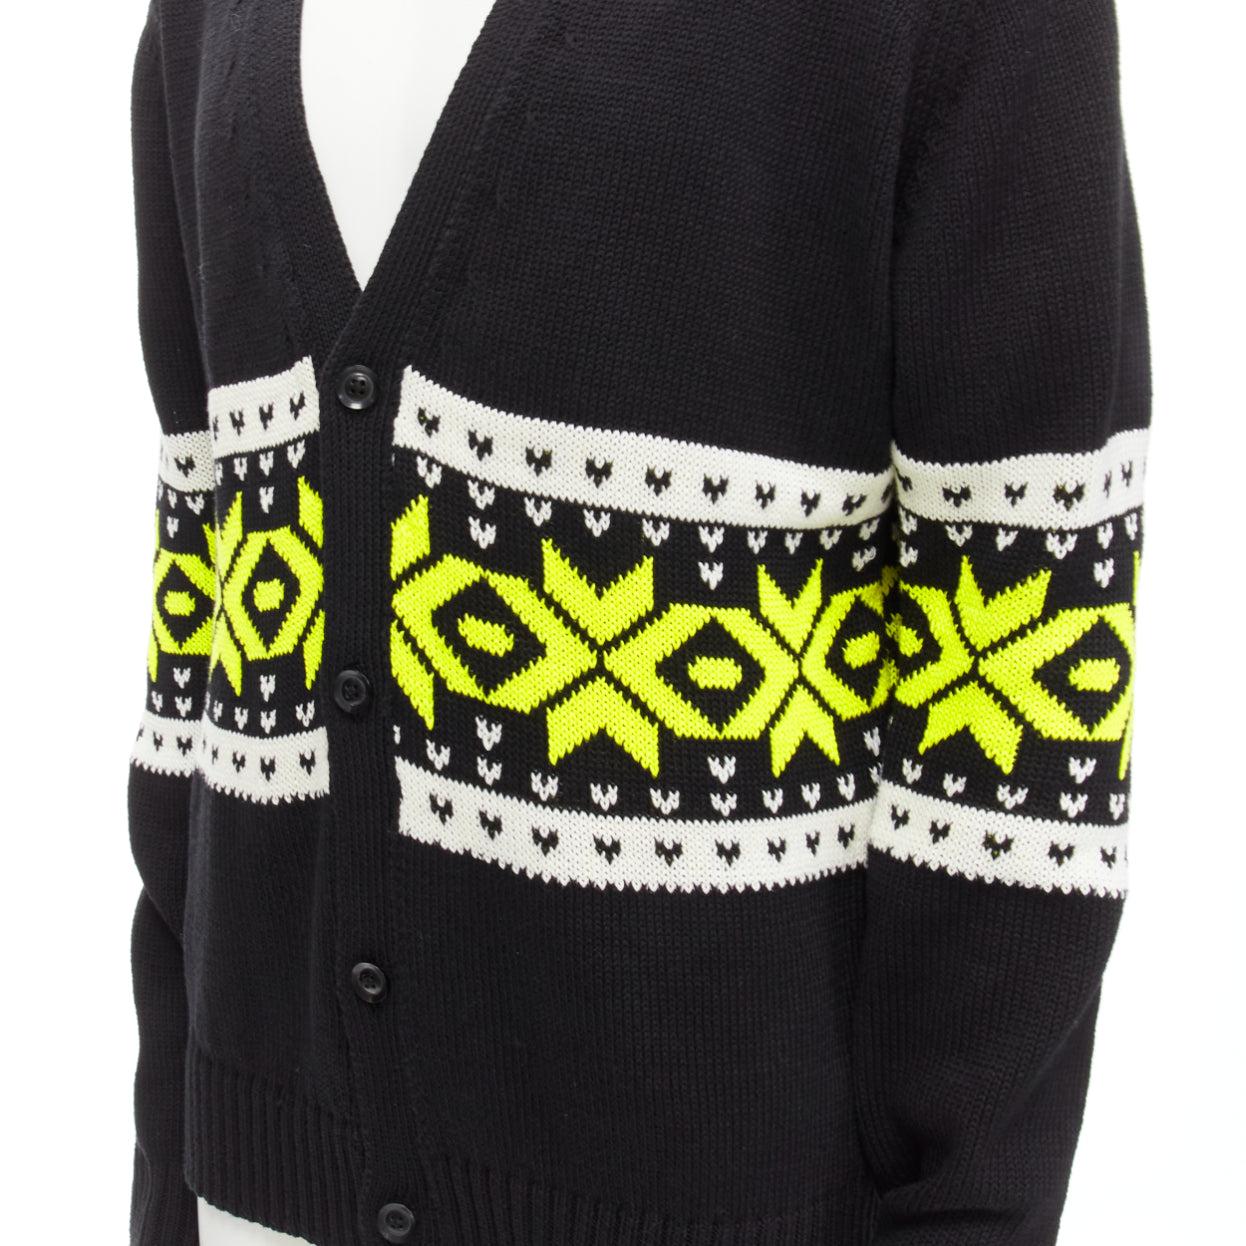 KOLOR black yellow intarsia fair isle 100% cotton cardigan jacket JP5 XXL
Reference: CAWG/A00298
Brand: Kolor
Material: Cotton
Color: Black, Yellow
Pattern: Fair Isle
Closure: Button
Extra Details: Similar pattern at back.
Made in: